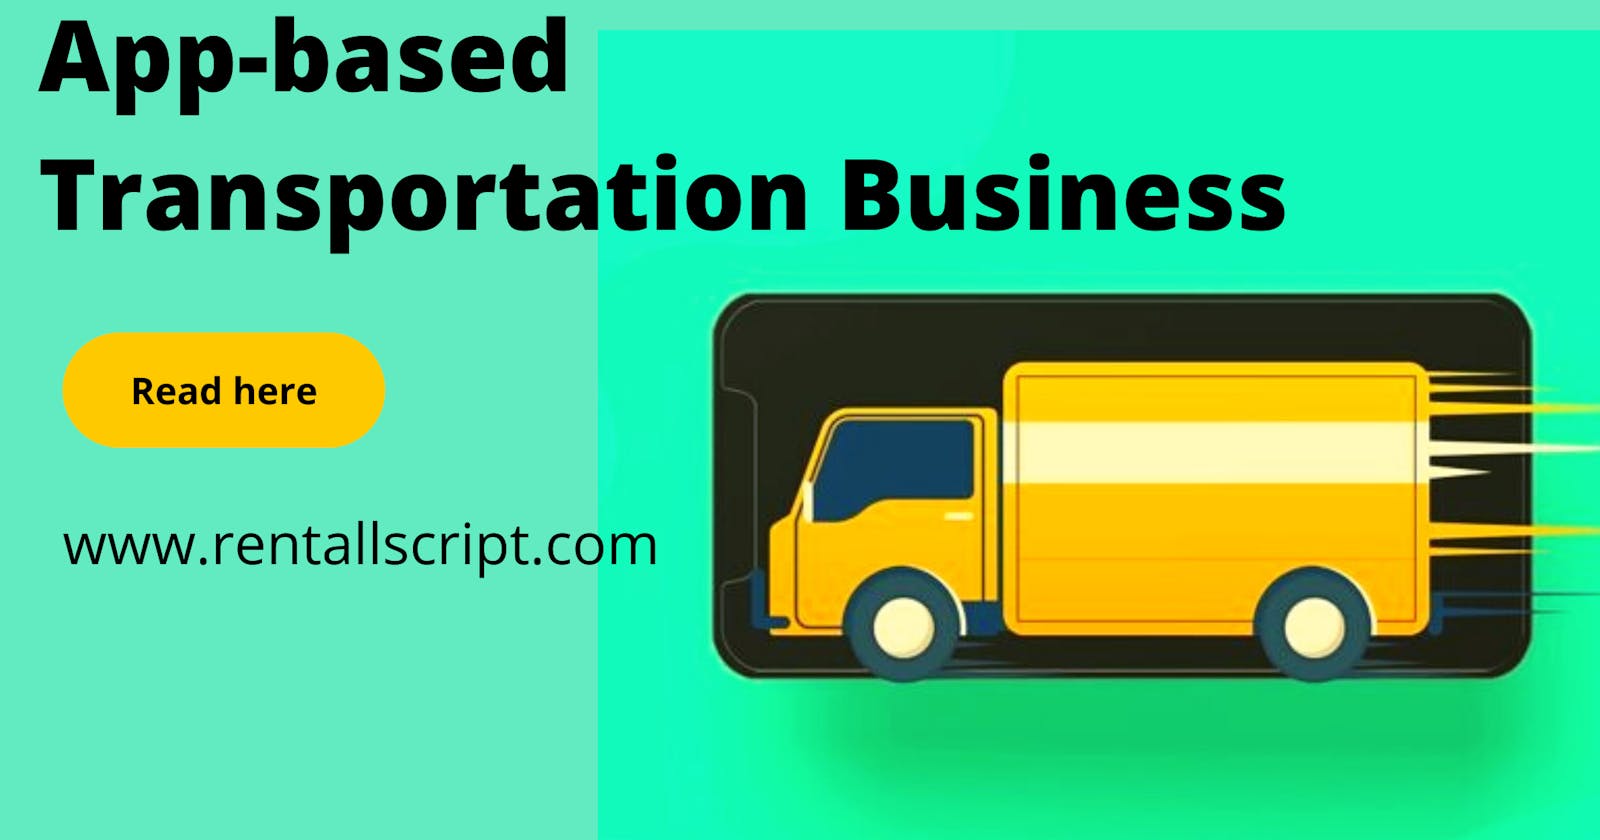 How to start an app-based transportation business?